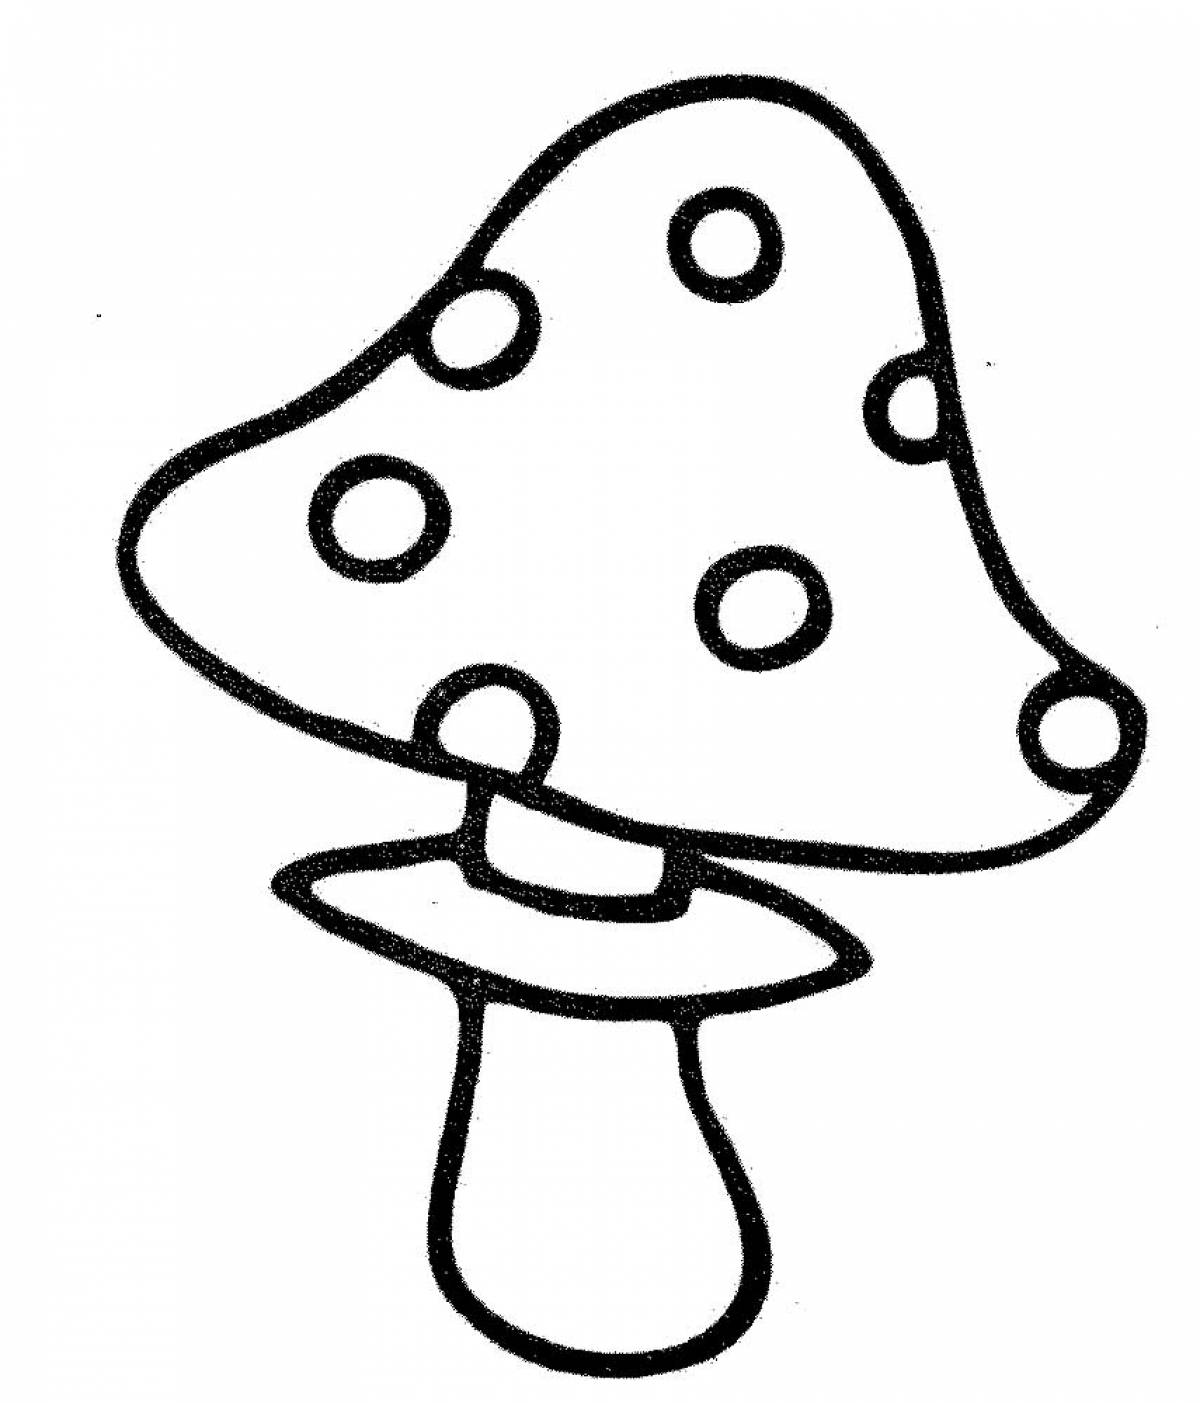 Fly agaric with a skirt